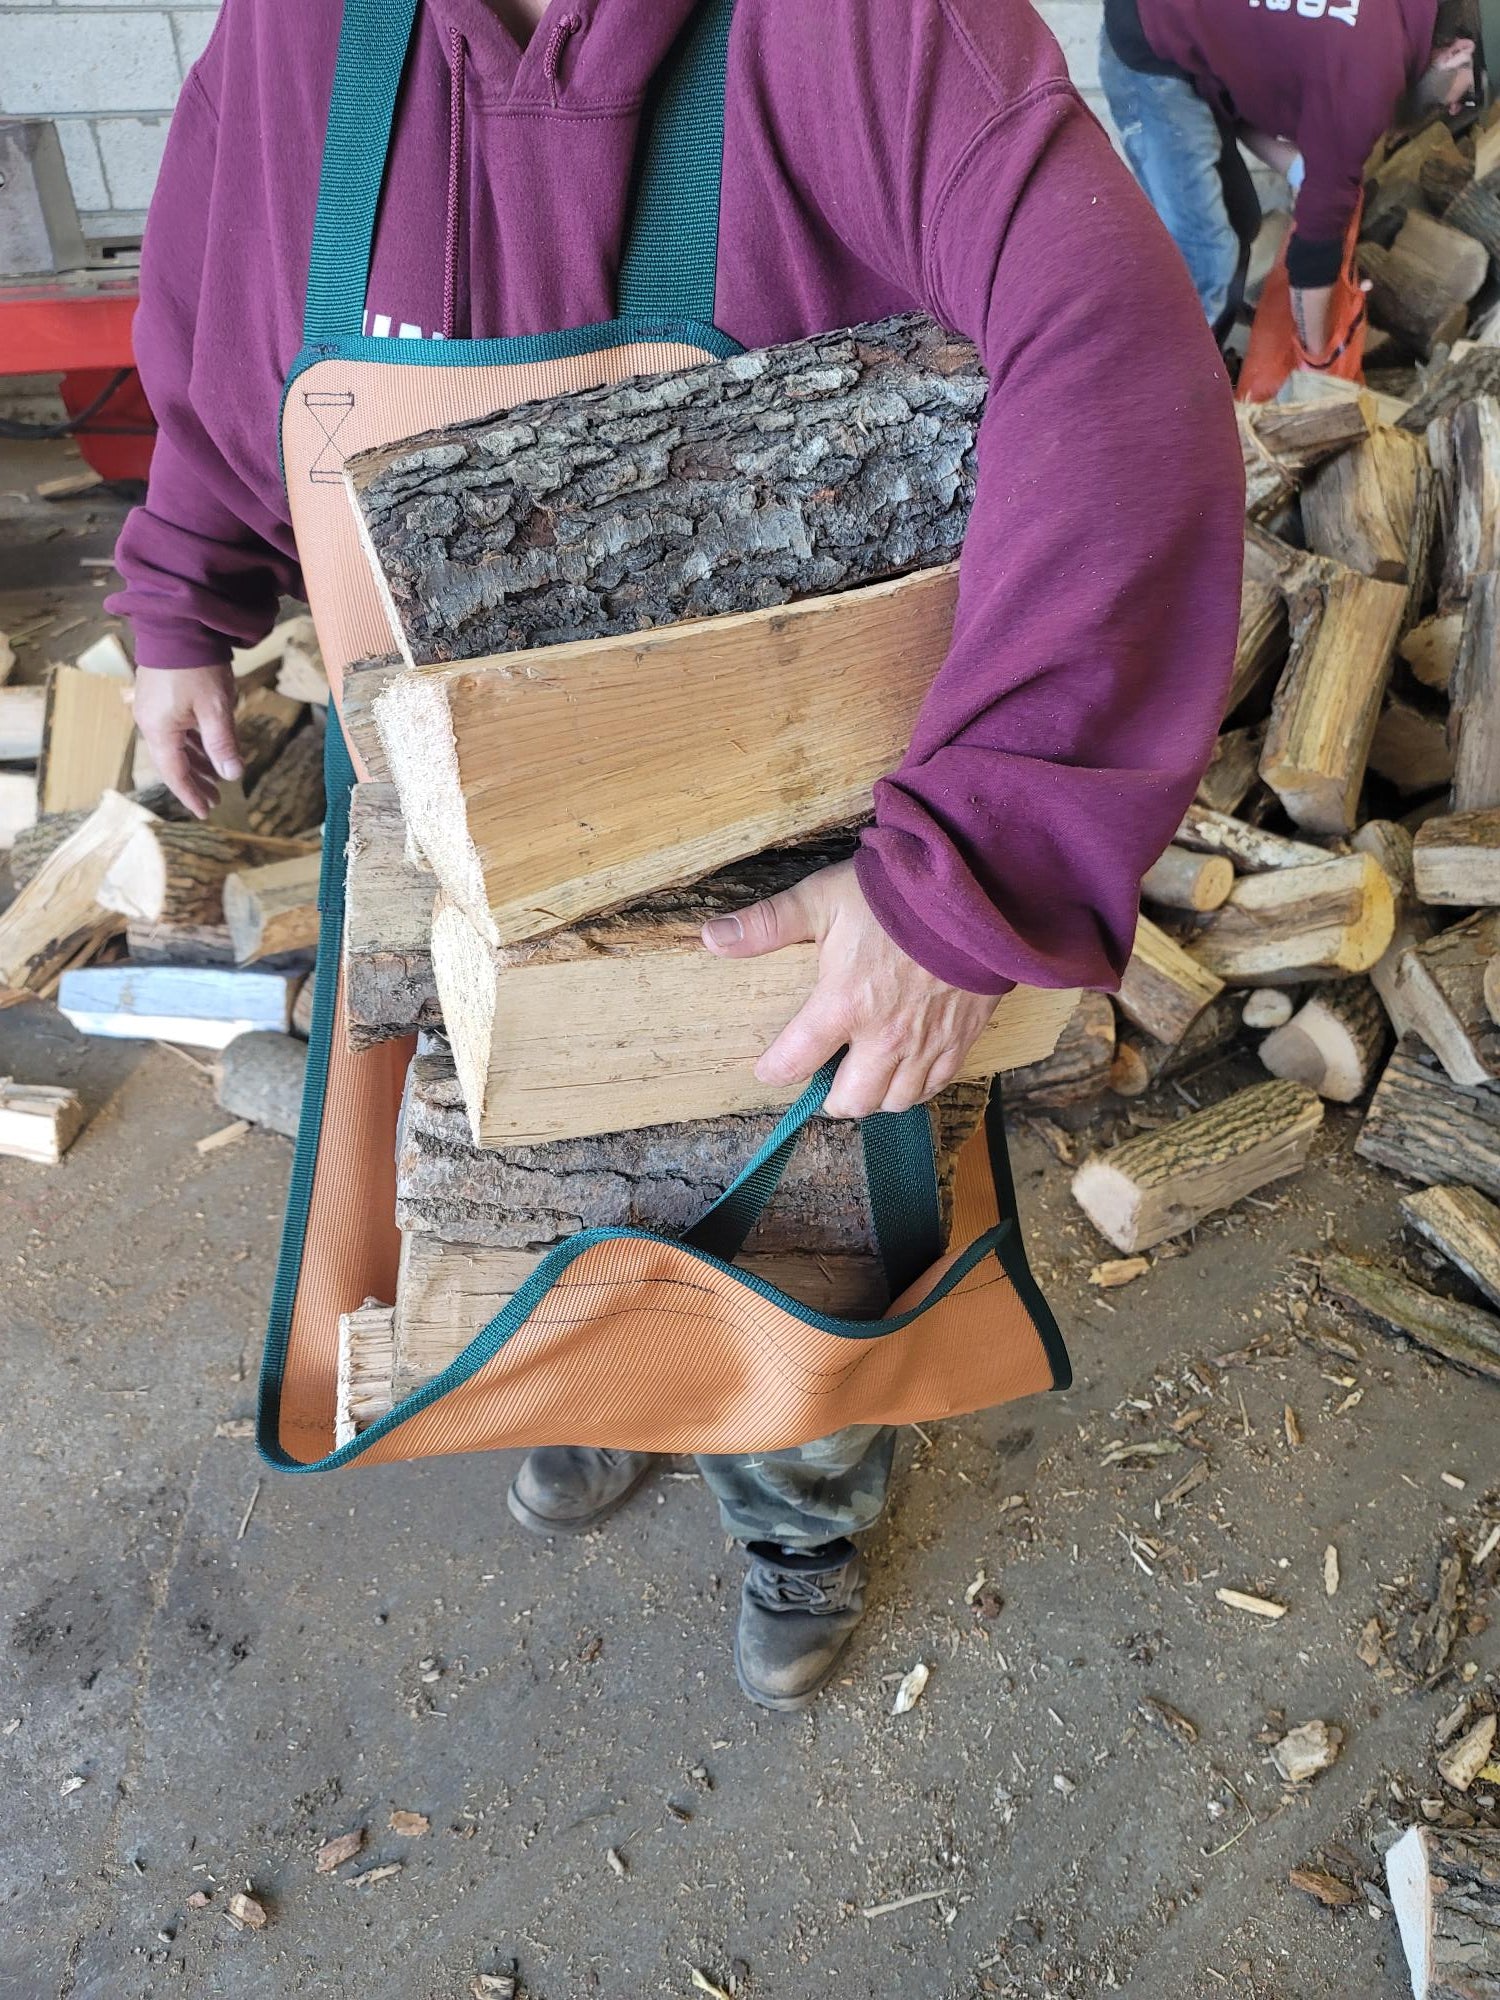 Firewood Carrying Apron